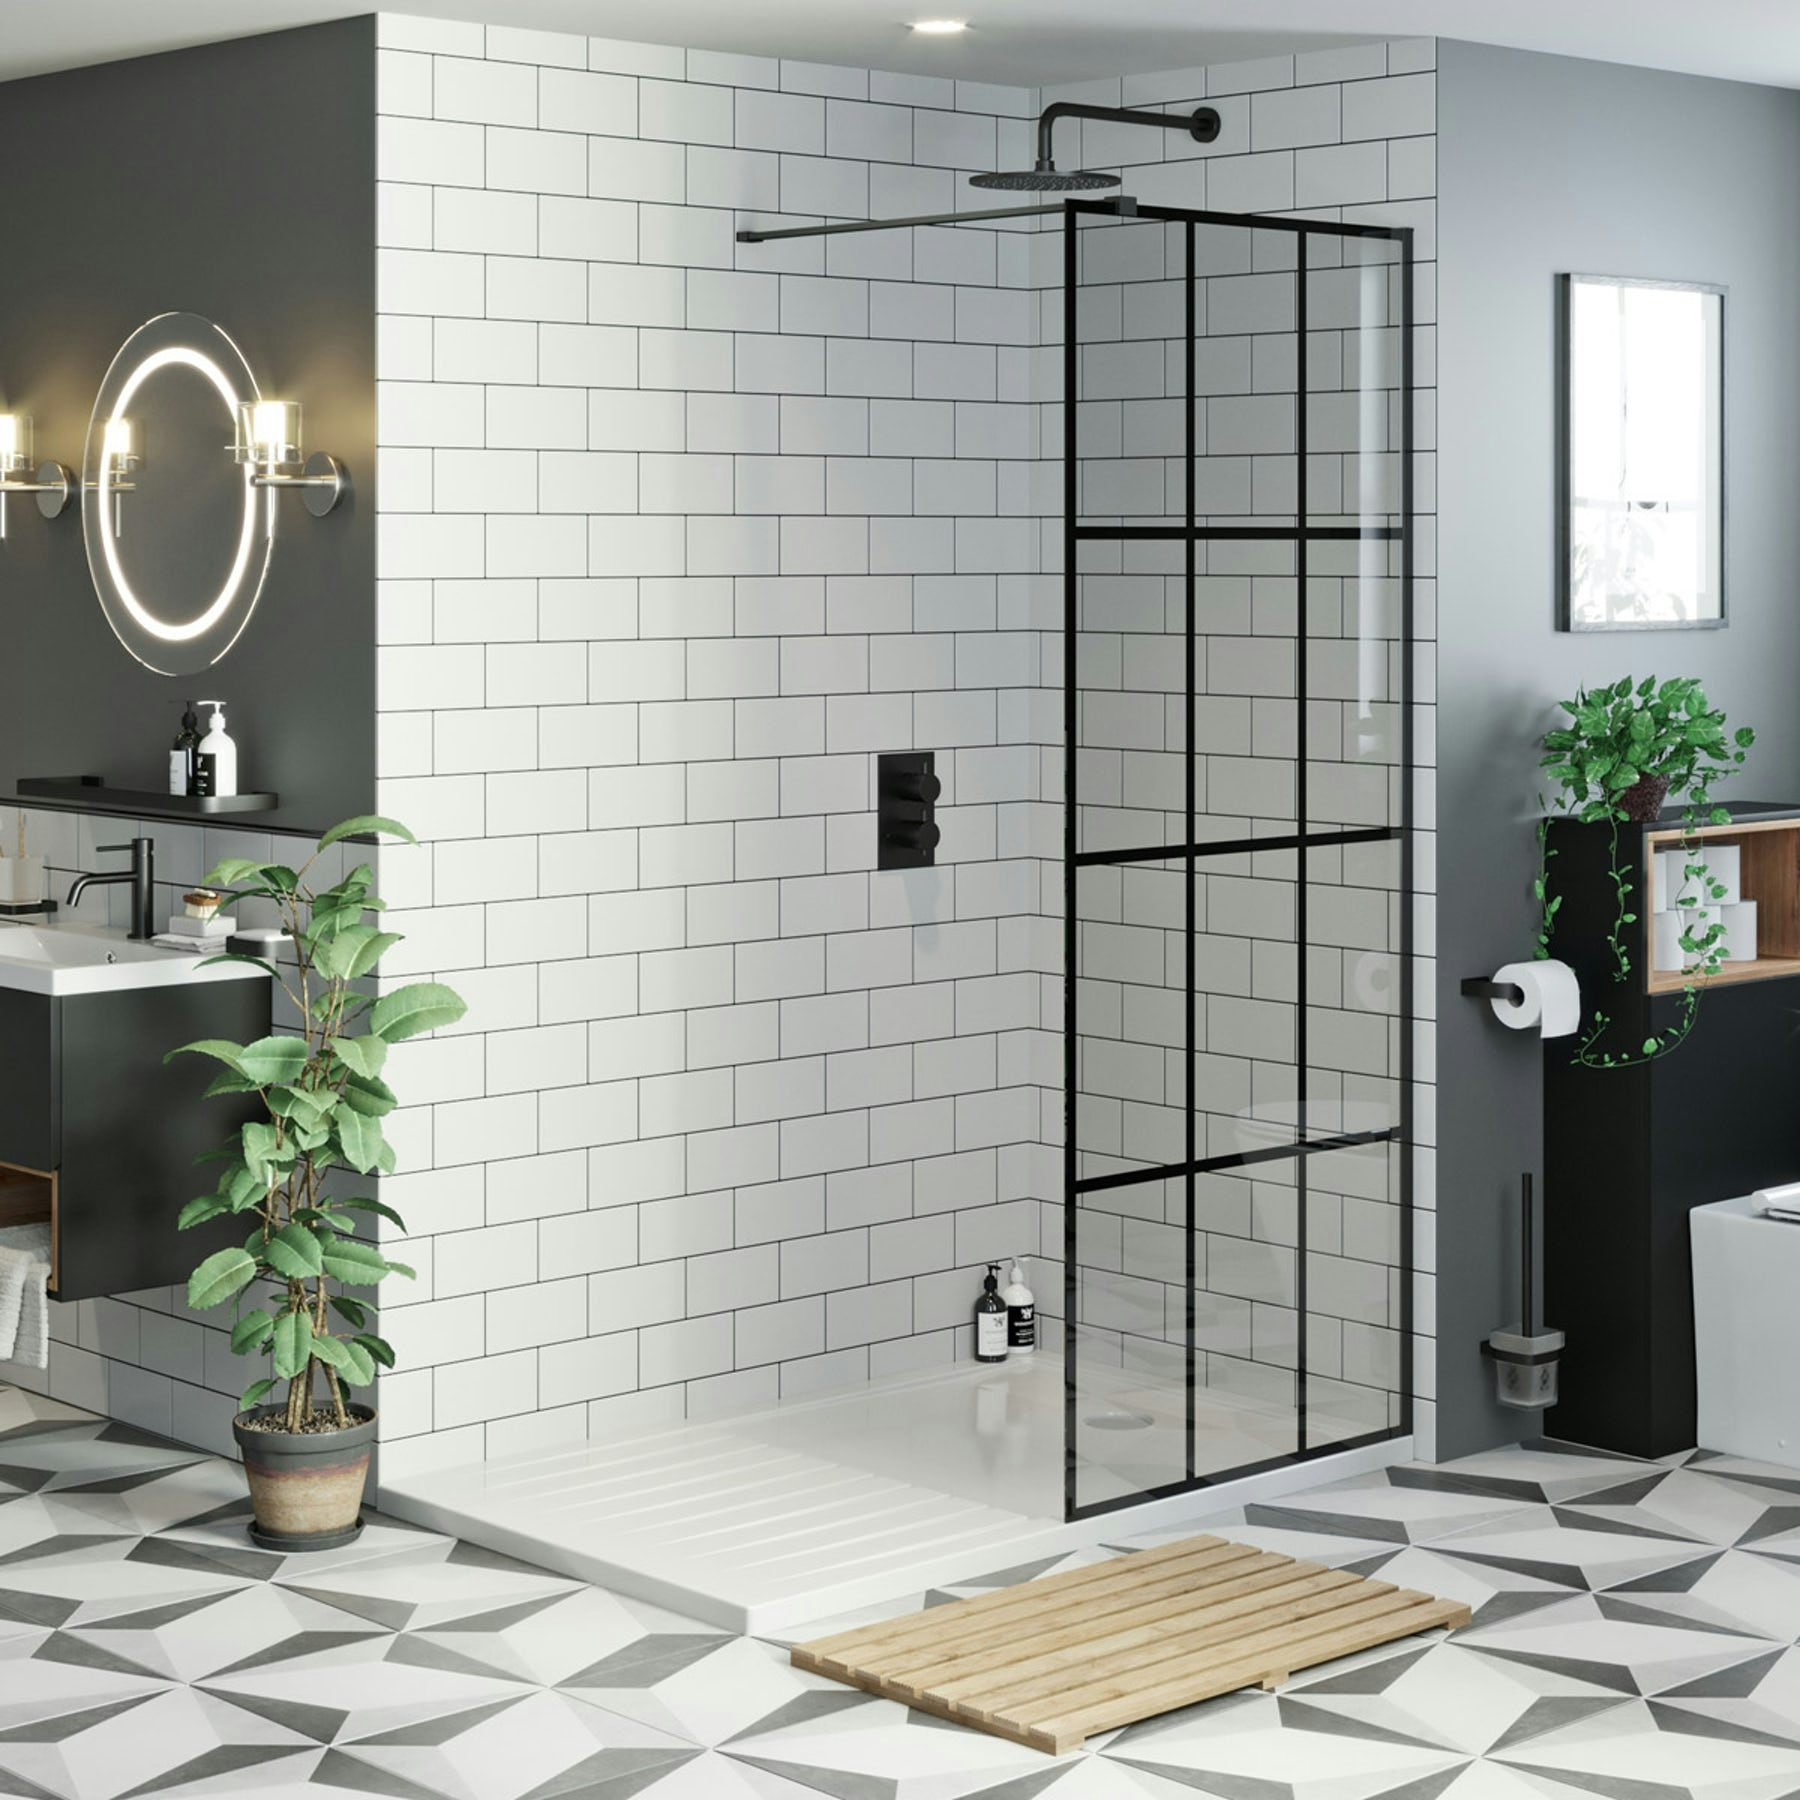 Mode 8mm black framed panel with stone shower tray